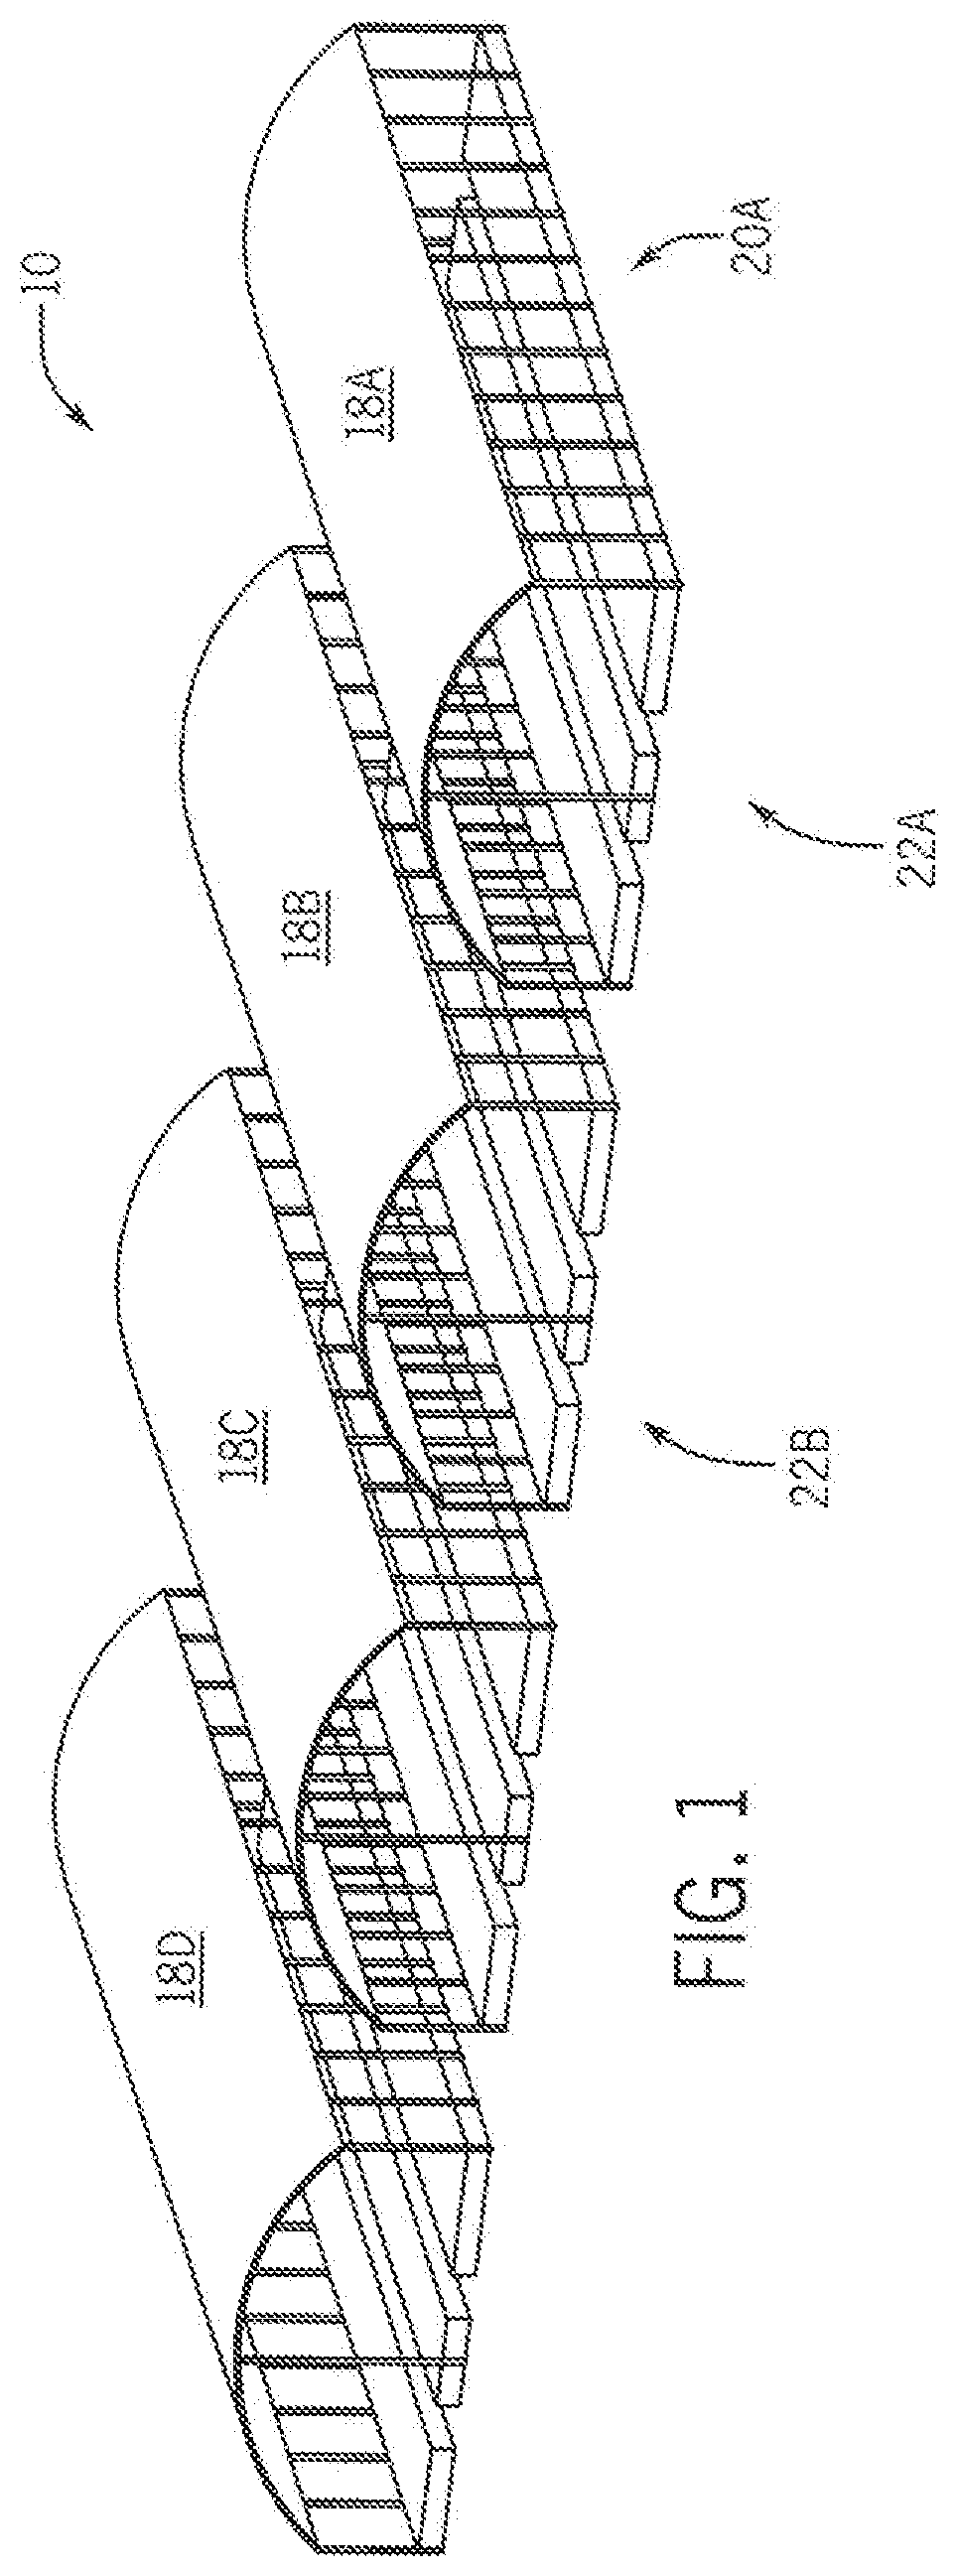 Adjustable system and apparatus for promoting plant growth and production with suspended emitters